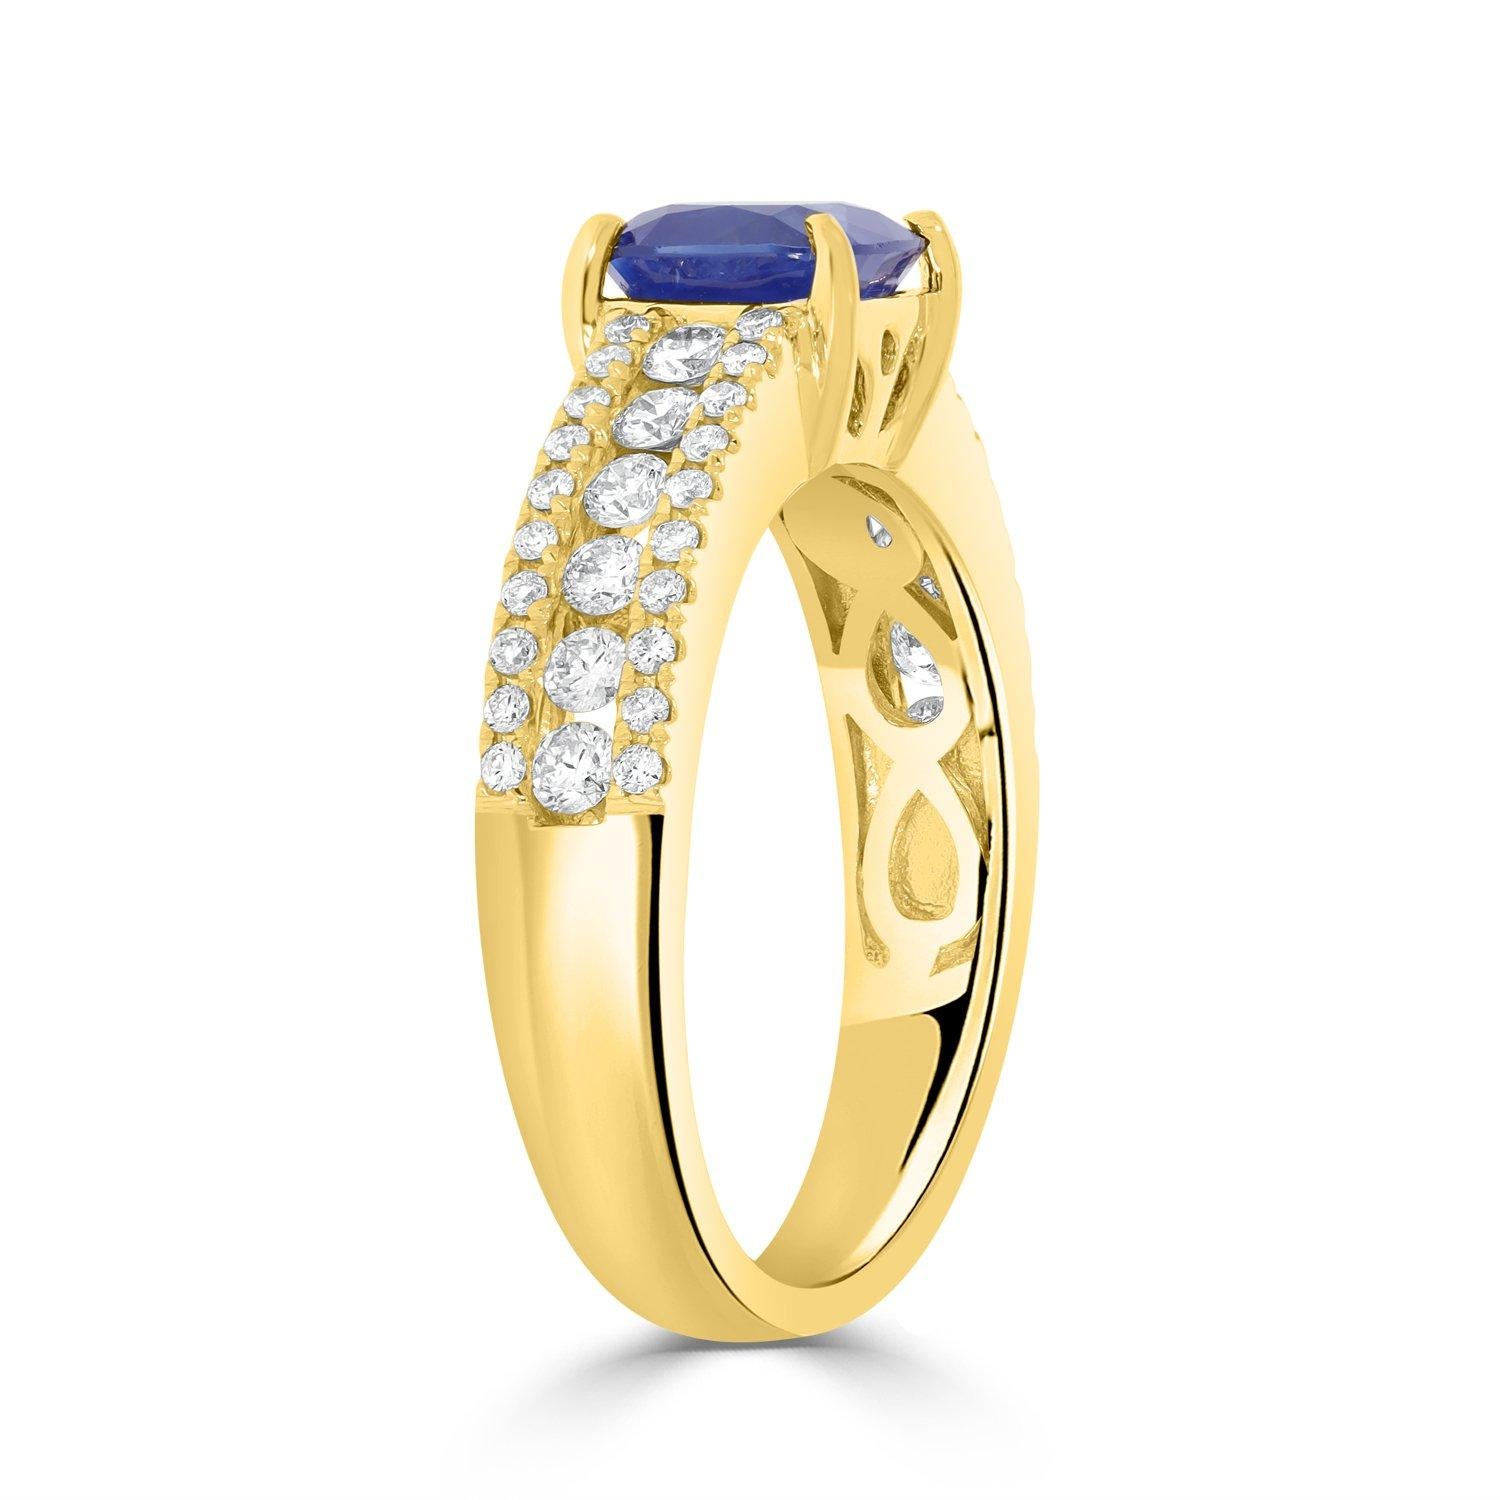 Cushion Cut 1.56Ct Sapphire Ring with 0.58Tct Diamonds Set in 14K Yellow Gold